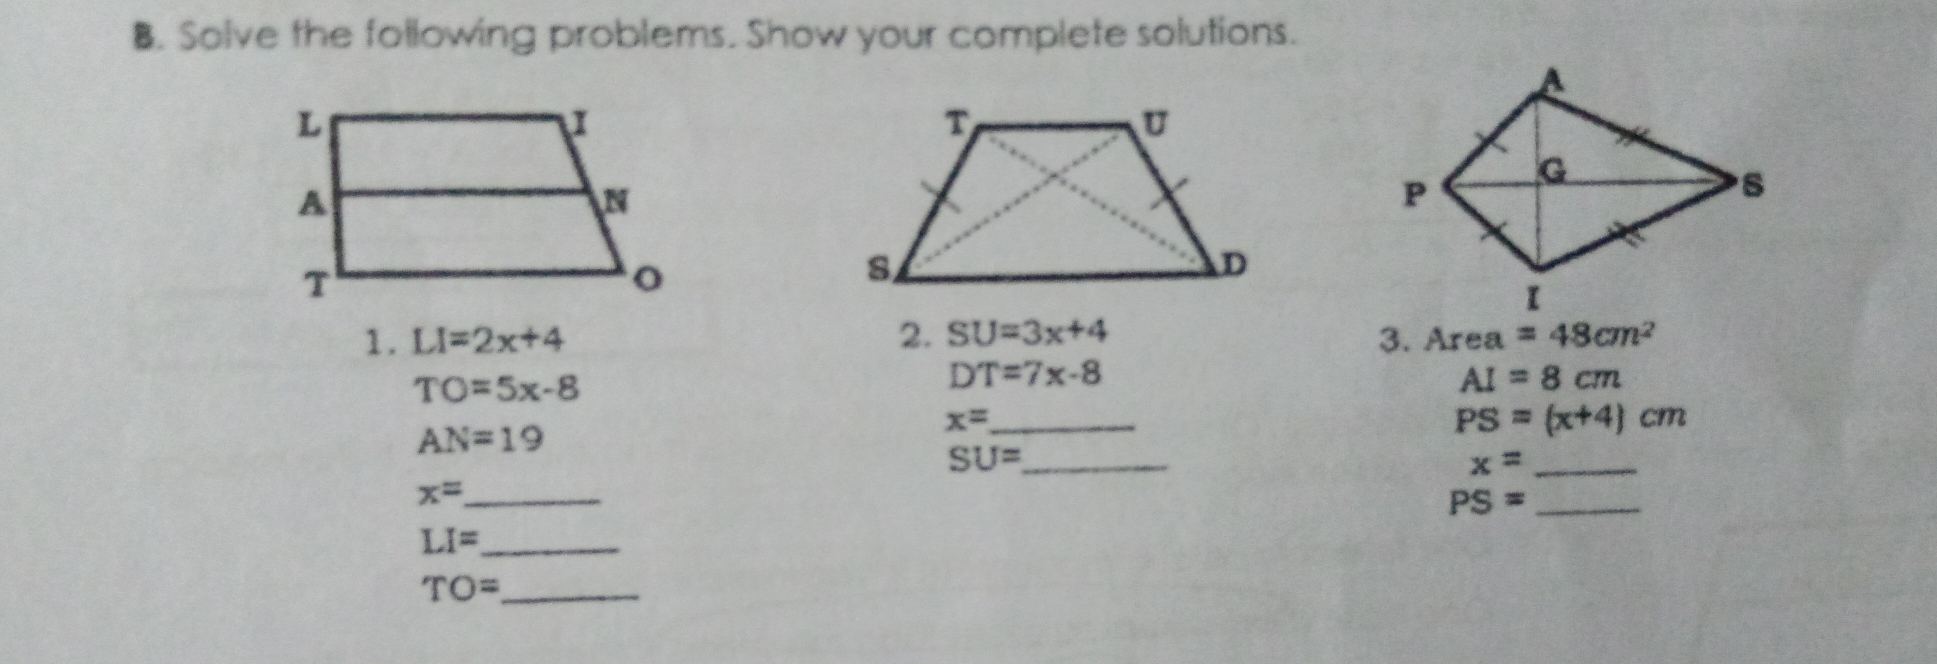 B. Solve the following problems. Show your complete solutions 1. LI=2x+4 2. SU=3x+4 3. Area = 88cm2 TO=5x-8 DT=7x-8 AI=8 cm AN=19 x=--- PS=x+4 cm SU=frac - x=...... x=---- PS=frac LI=frac - TO=frac